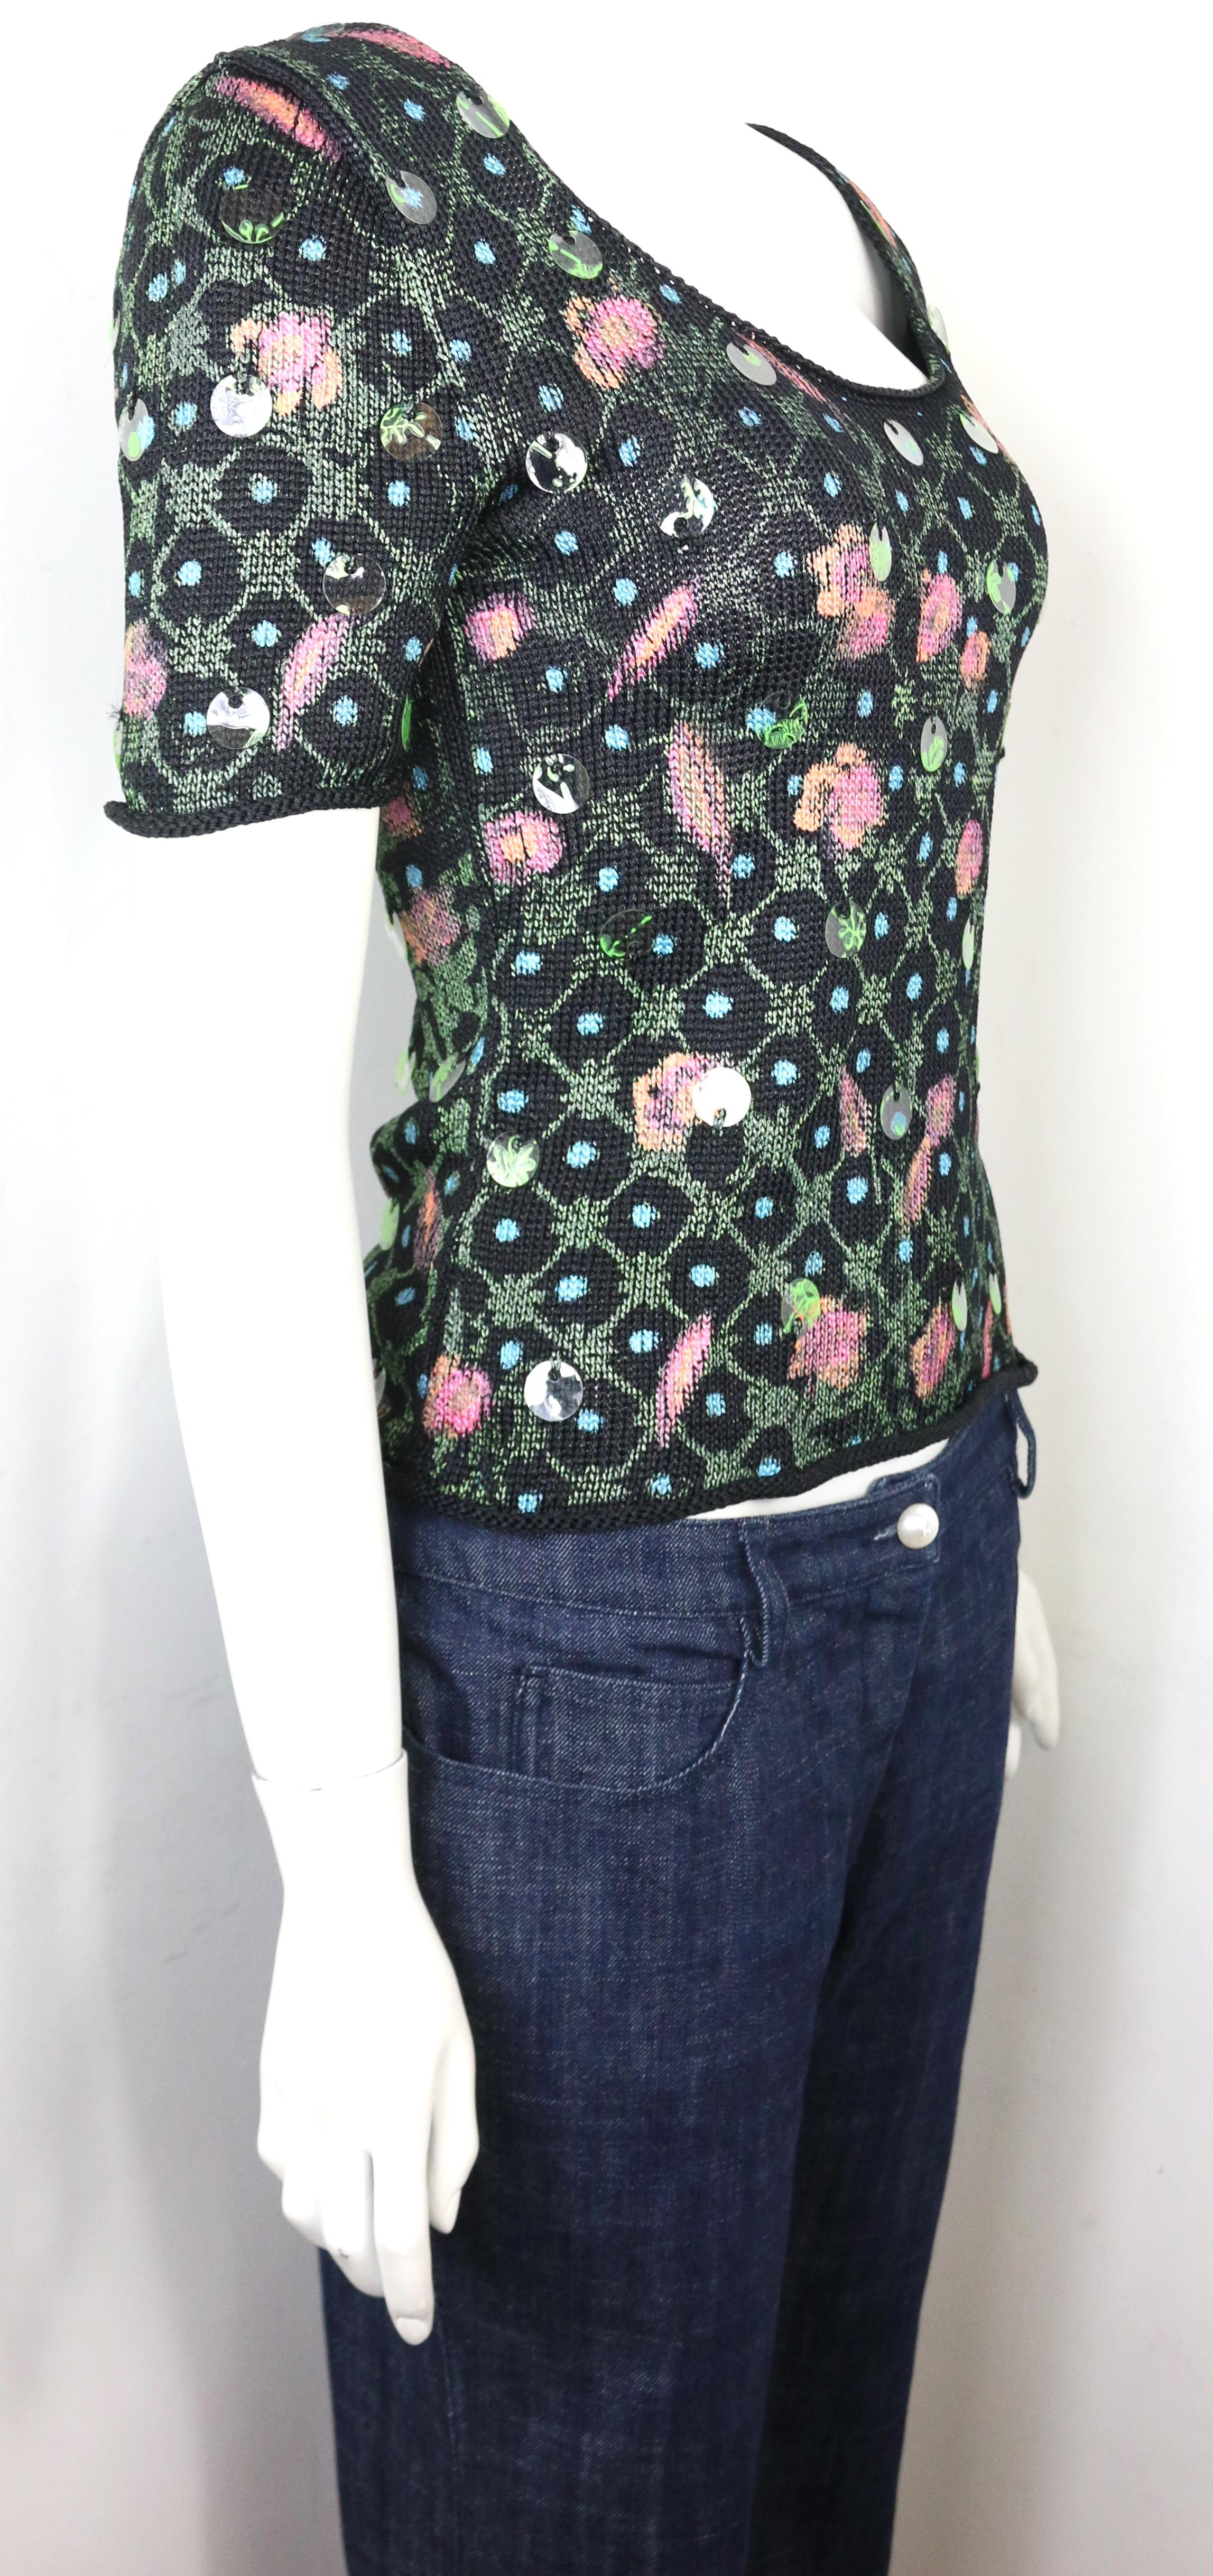 - VIntage 1995 Christian Lacroix black knitted short sleeves top with vinyl sequins. 

- Featuring multi-prints on the knit. 

- SIze M. 

- 100% Rayon.  

- Unworn attached with original tag.